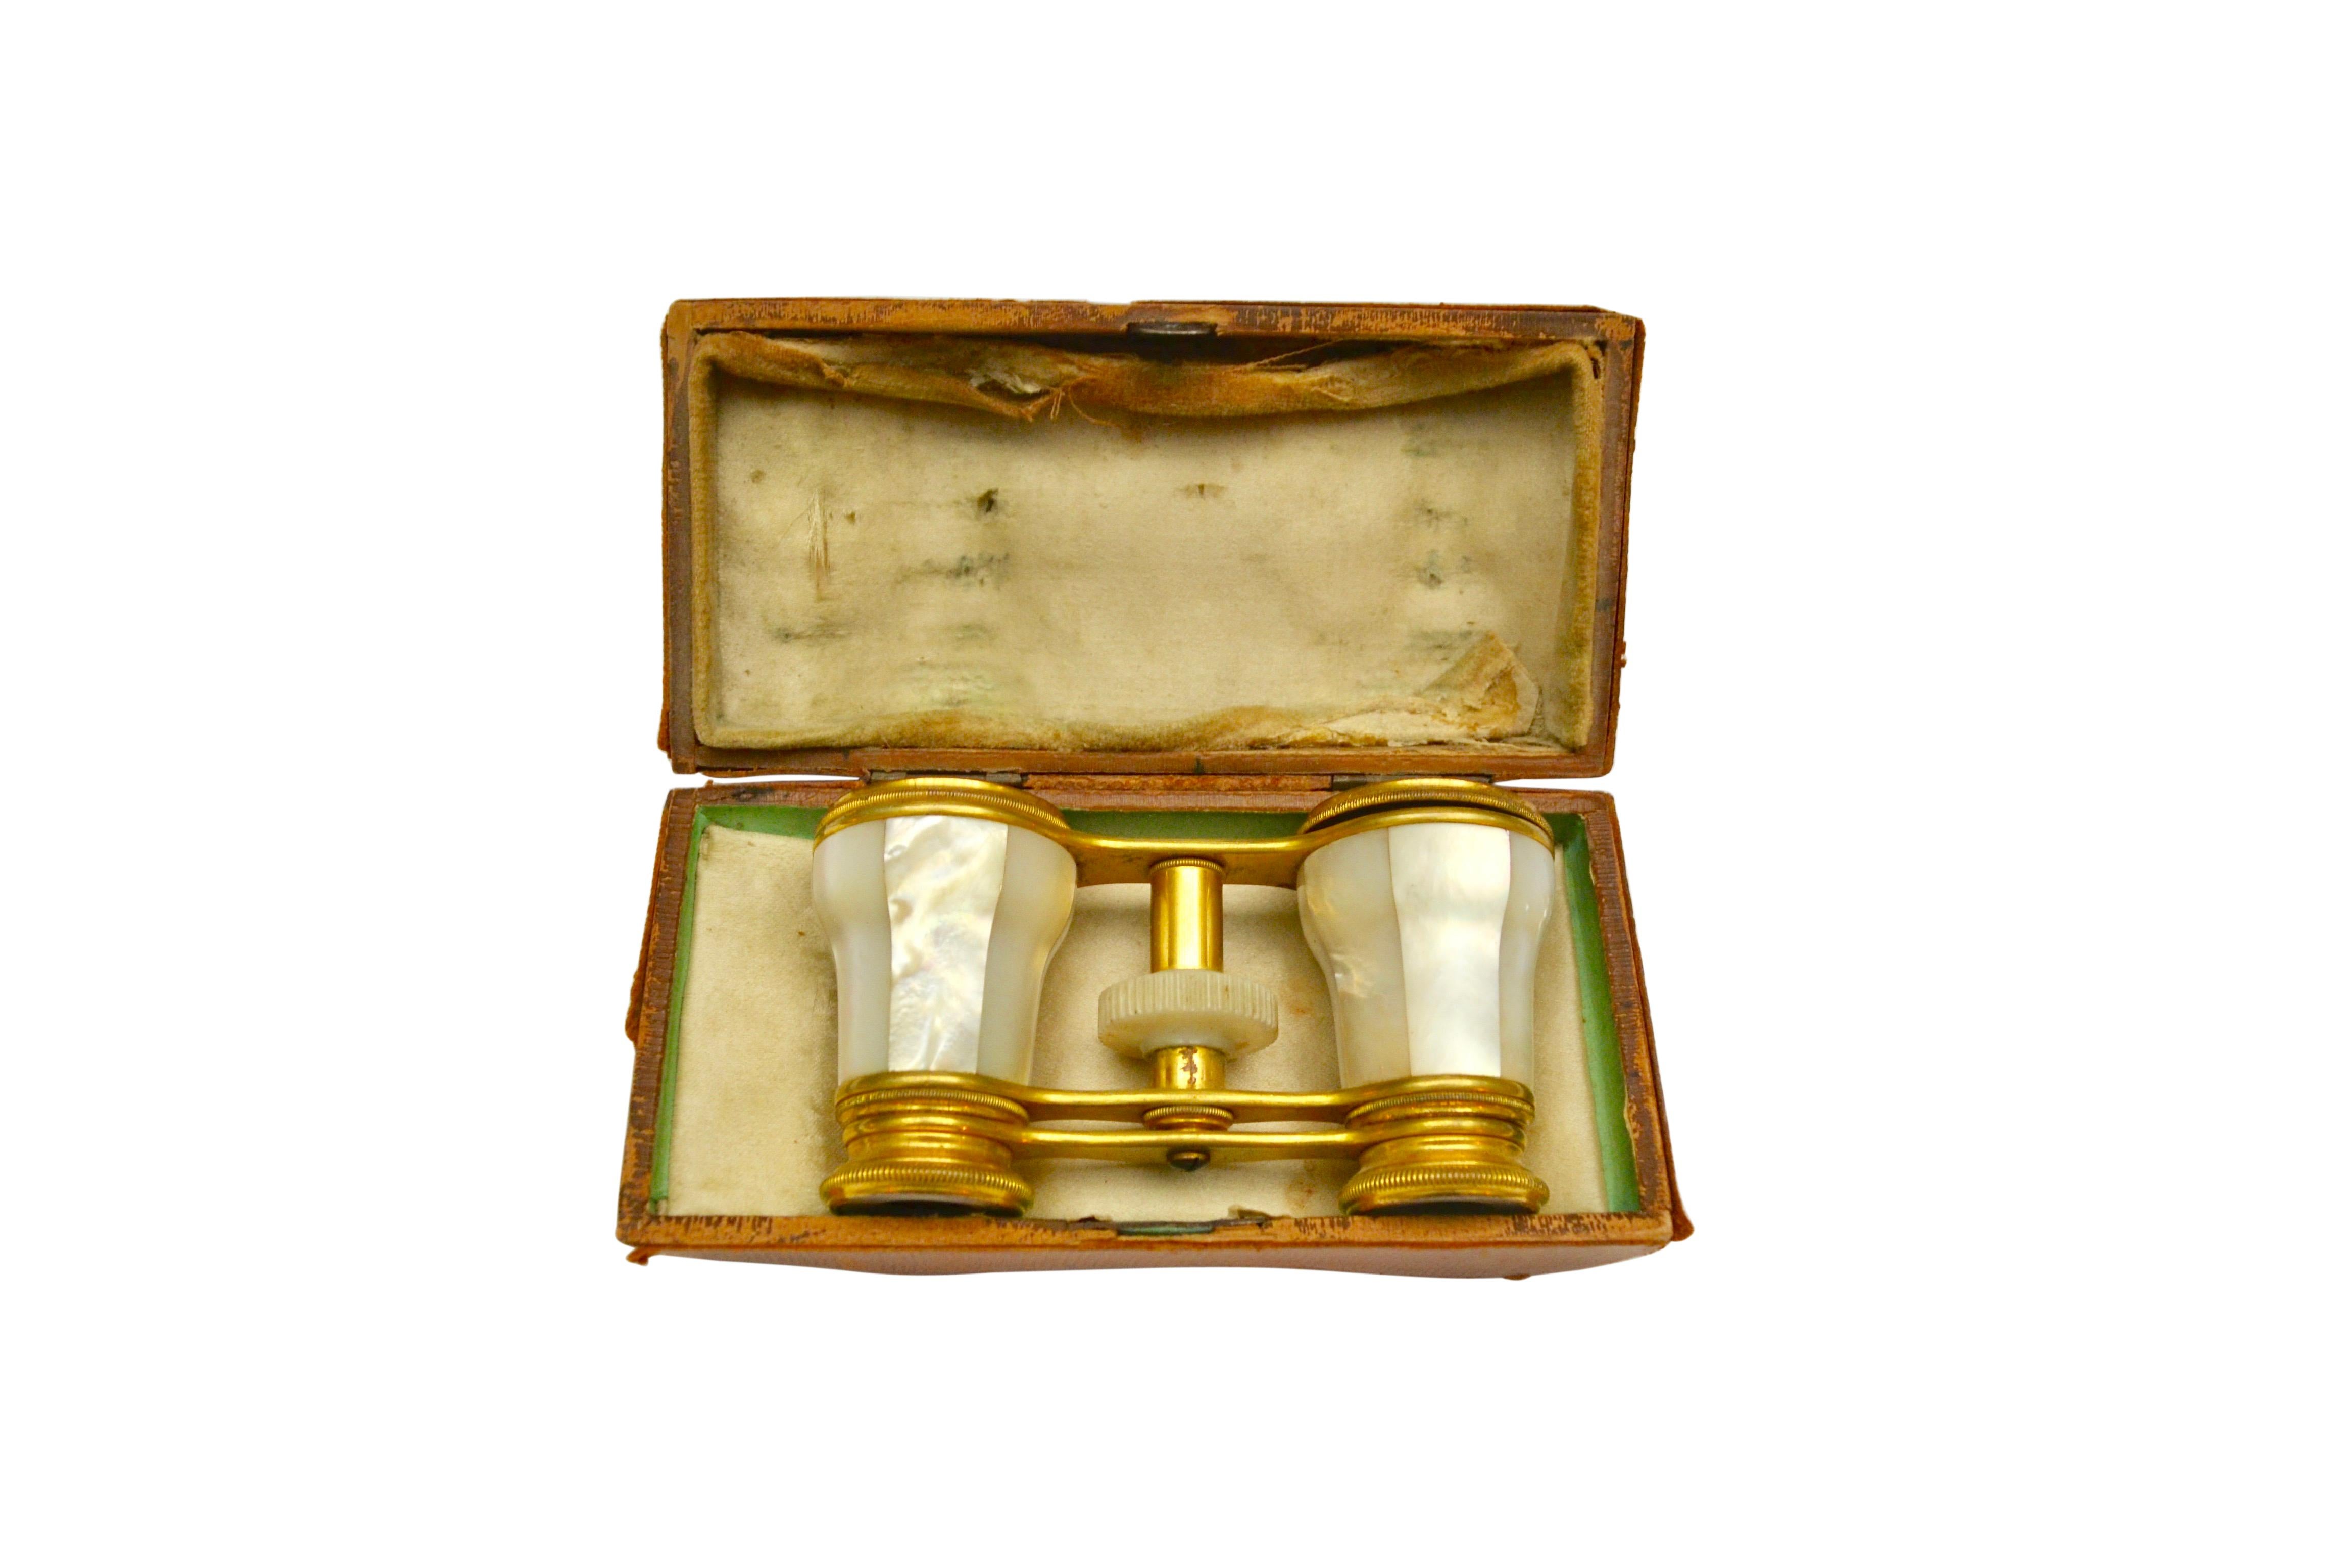 A simple yet very elegant set of Napoleon III French gilt bronze opera glasses richly finished in mother-of-pearl, a material which was all the rage especially in furniture n the late 19 century. The opera glasses are presented in their original tan